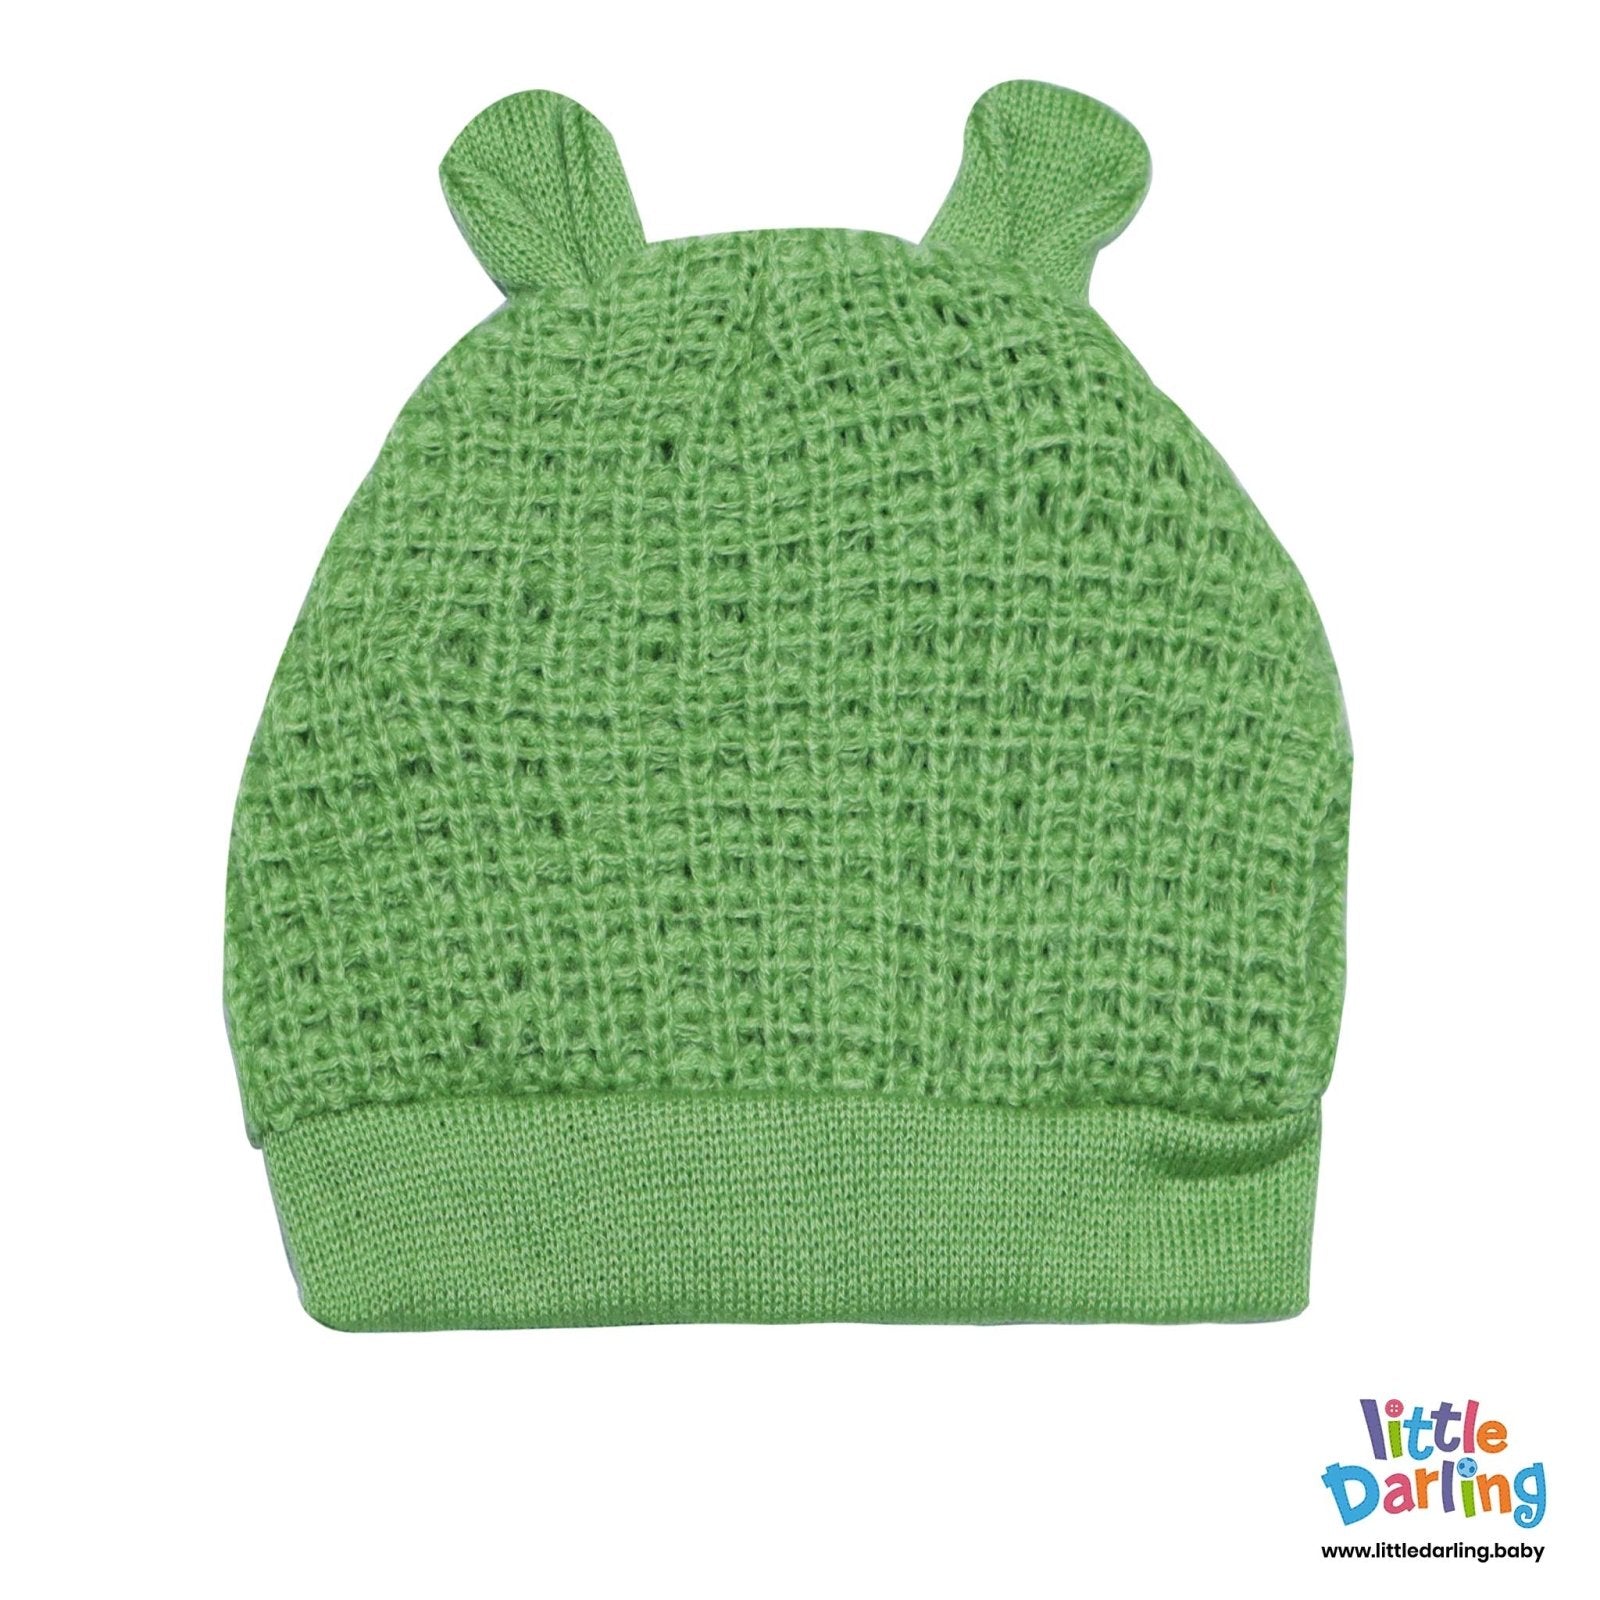 4 Pcs Woolen Gift Set Knitting Green Color by Little Darling